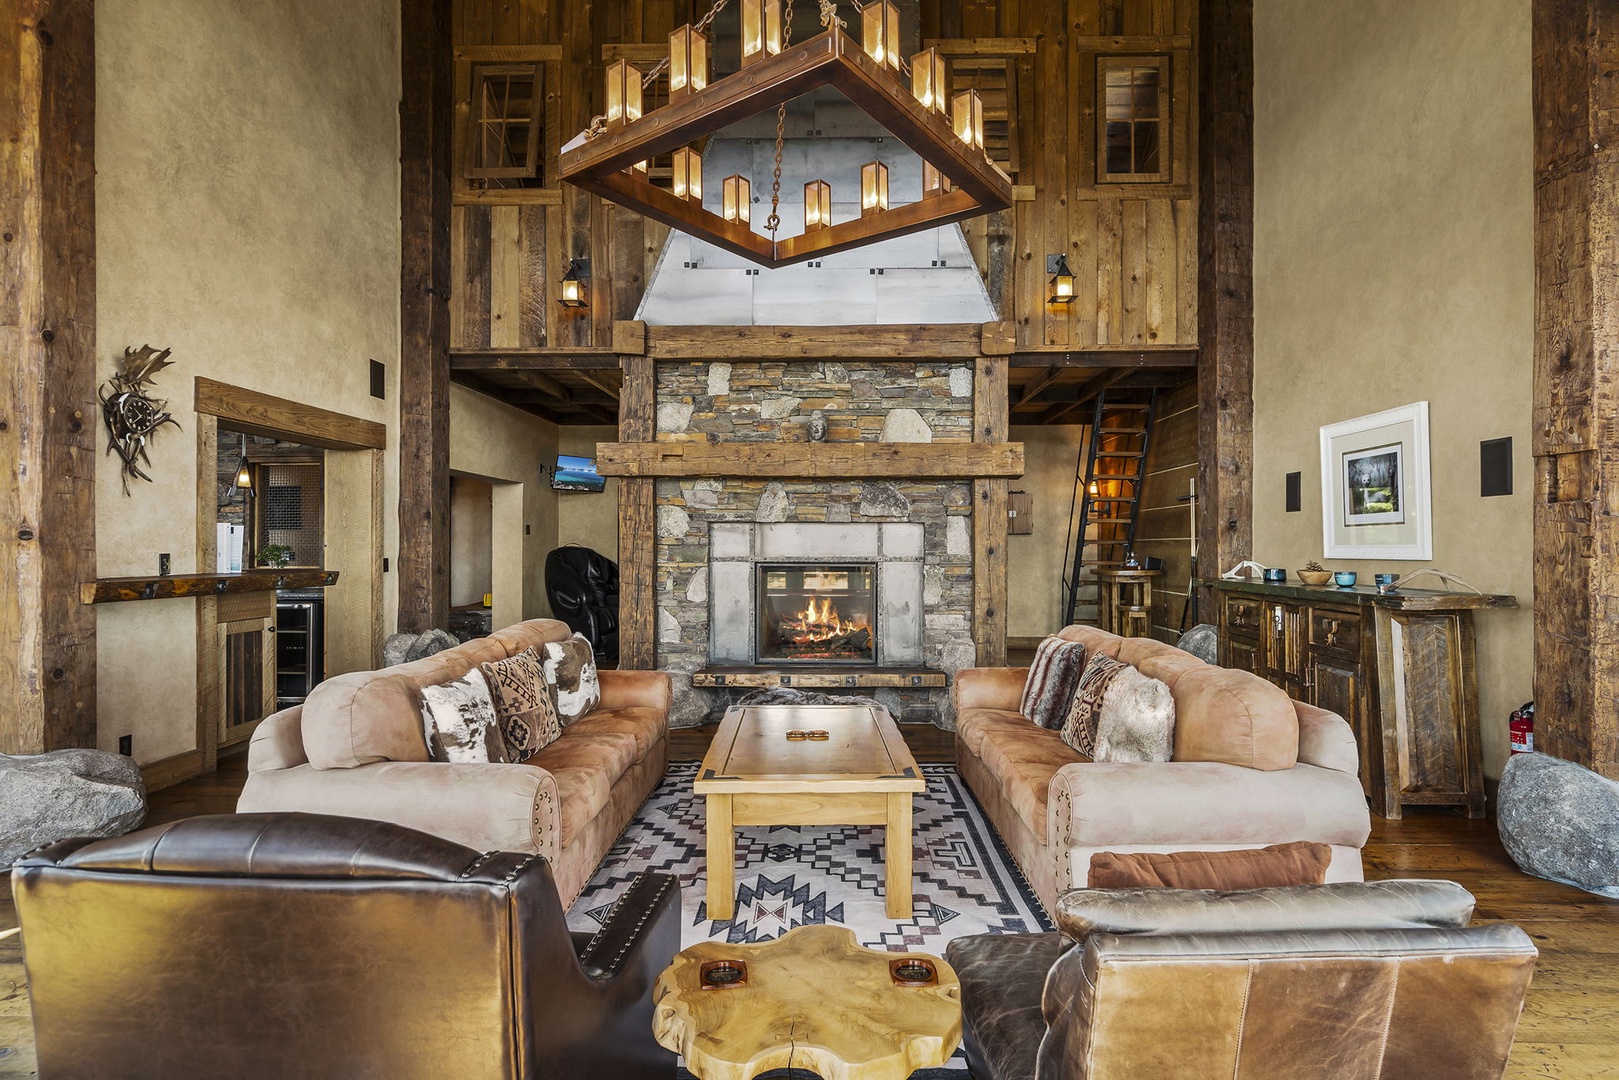 Lounge area with gas fireplace: Lakeview Mountaintop Chateau